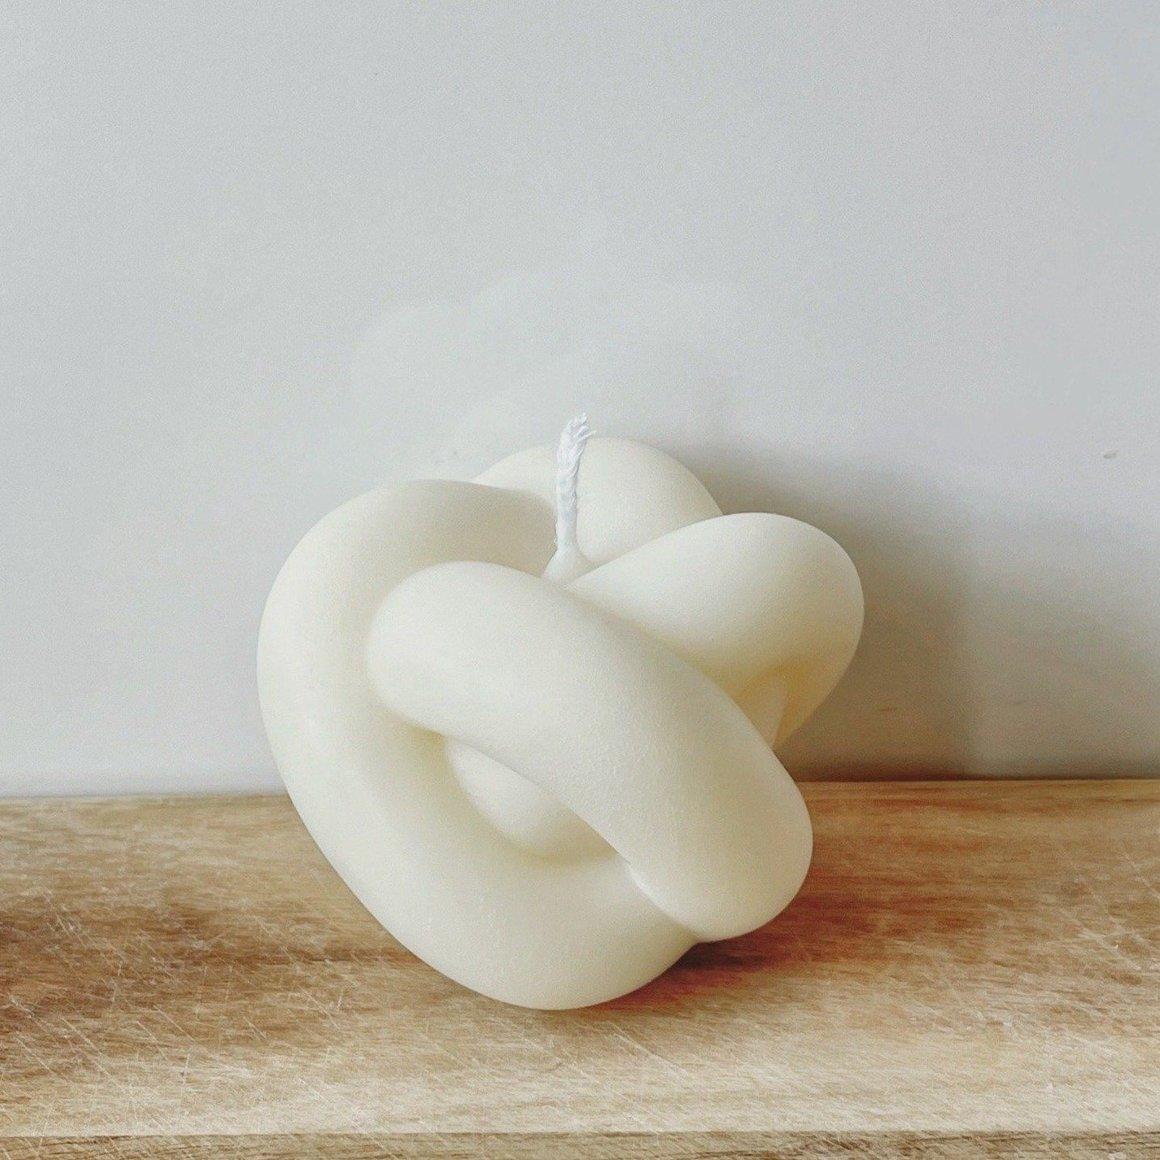 Twist Knot Candle - Creamy White